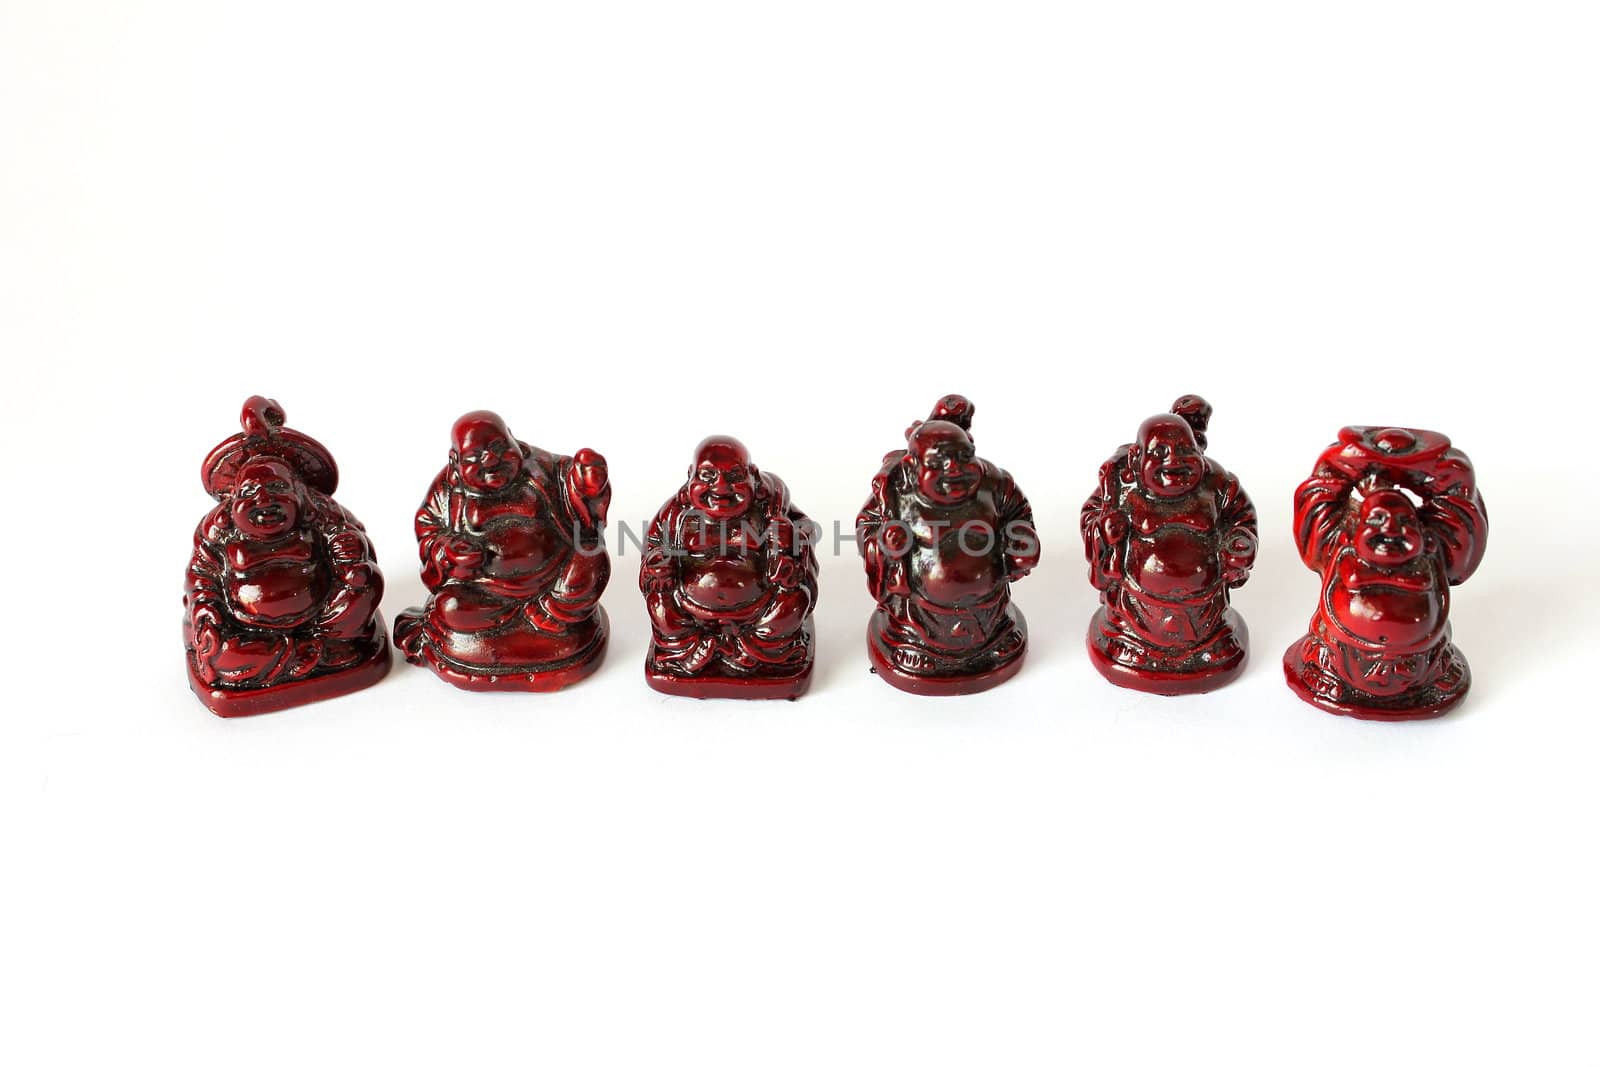 Isolated set of different Buddhas